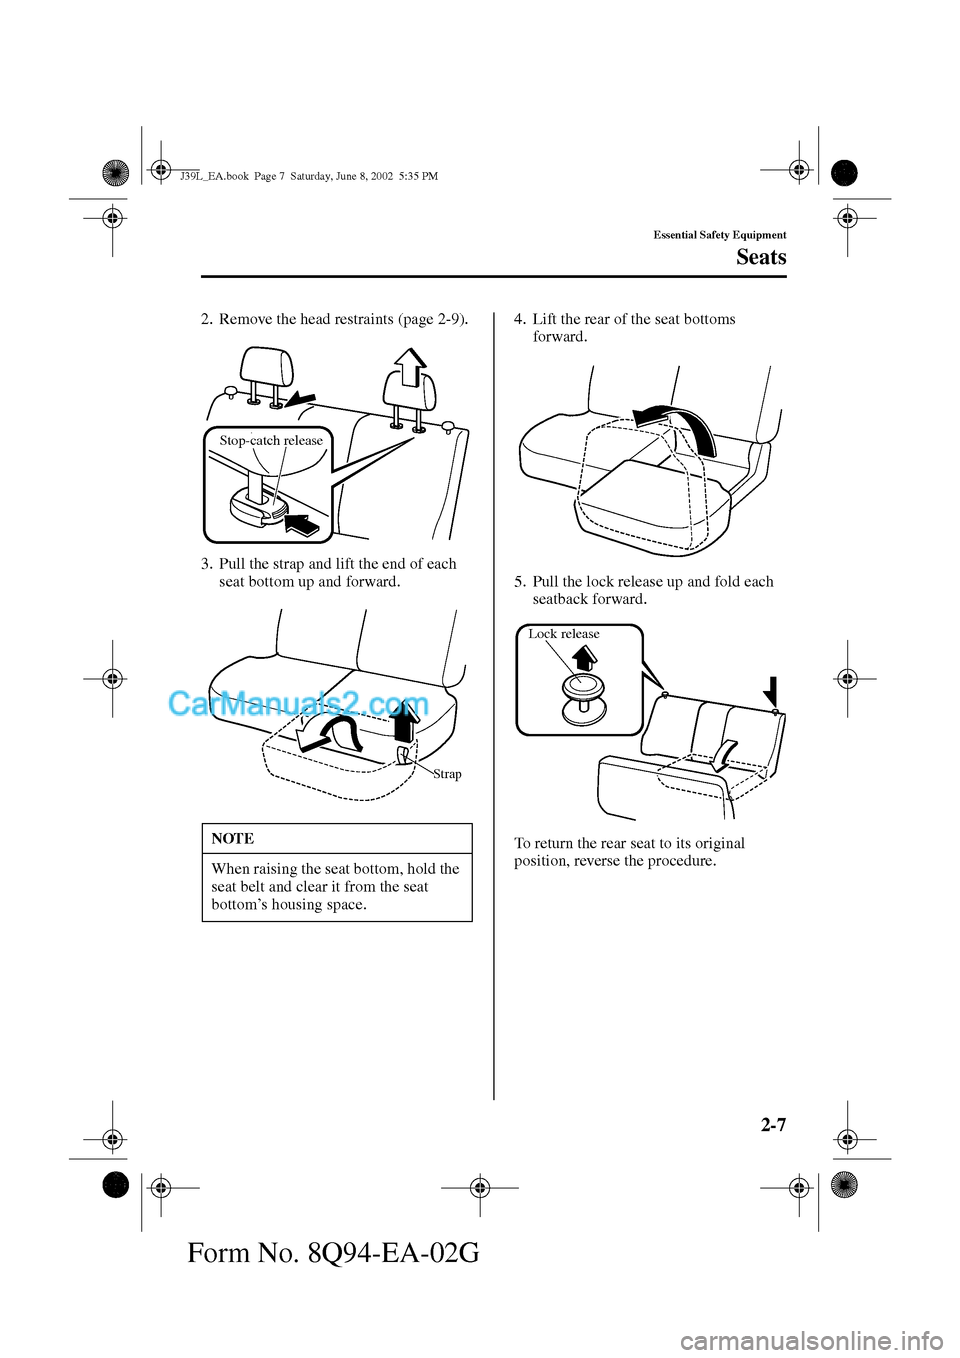 MAZDA MODEL PROTÉGÉ 2003  Owners Manual (in English) 2-7
Essential Safety Equipment
Seats
Form No. 8Q94-EA-02G
2. Remove the head restraints (page 2-9).
3. Pull the strap and lift the end of each 
seat bottom up and forward.4. Lift the rear of the seat 